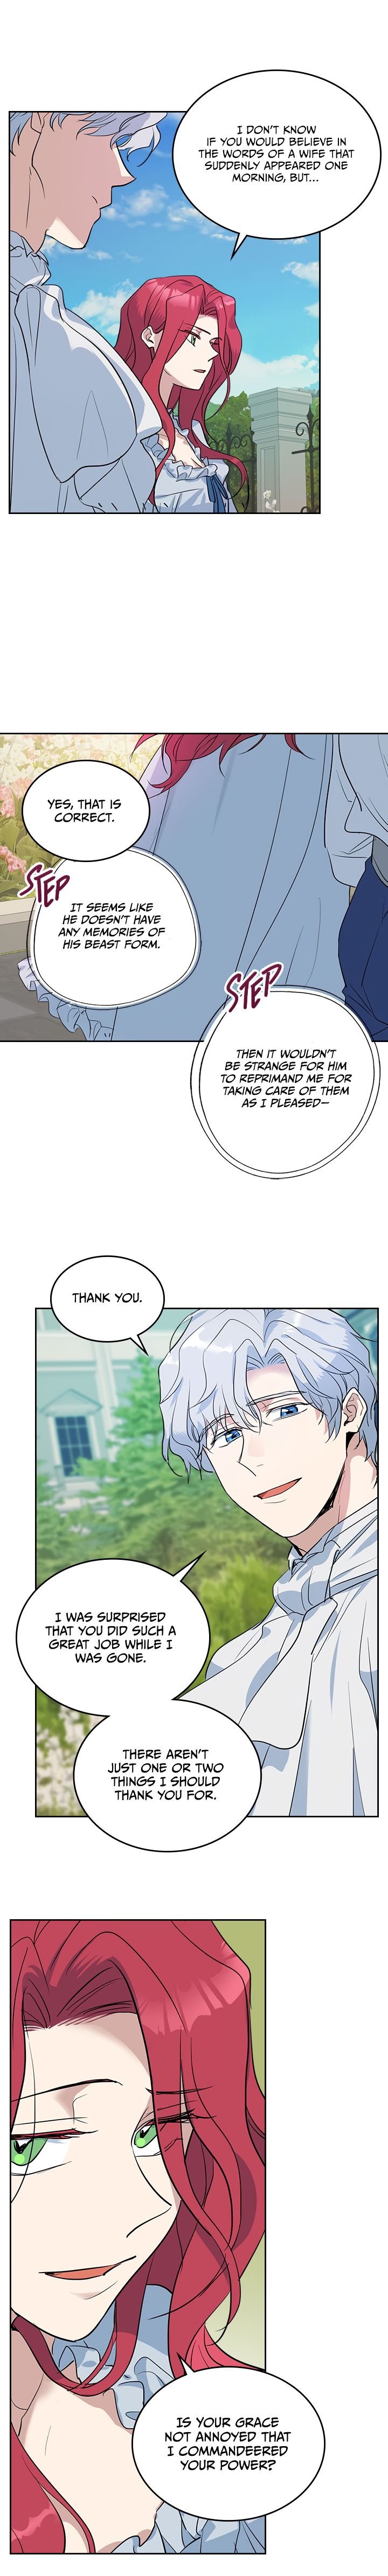 the-lady-and-the-beast-chap-30-6